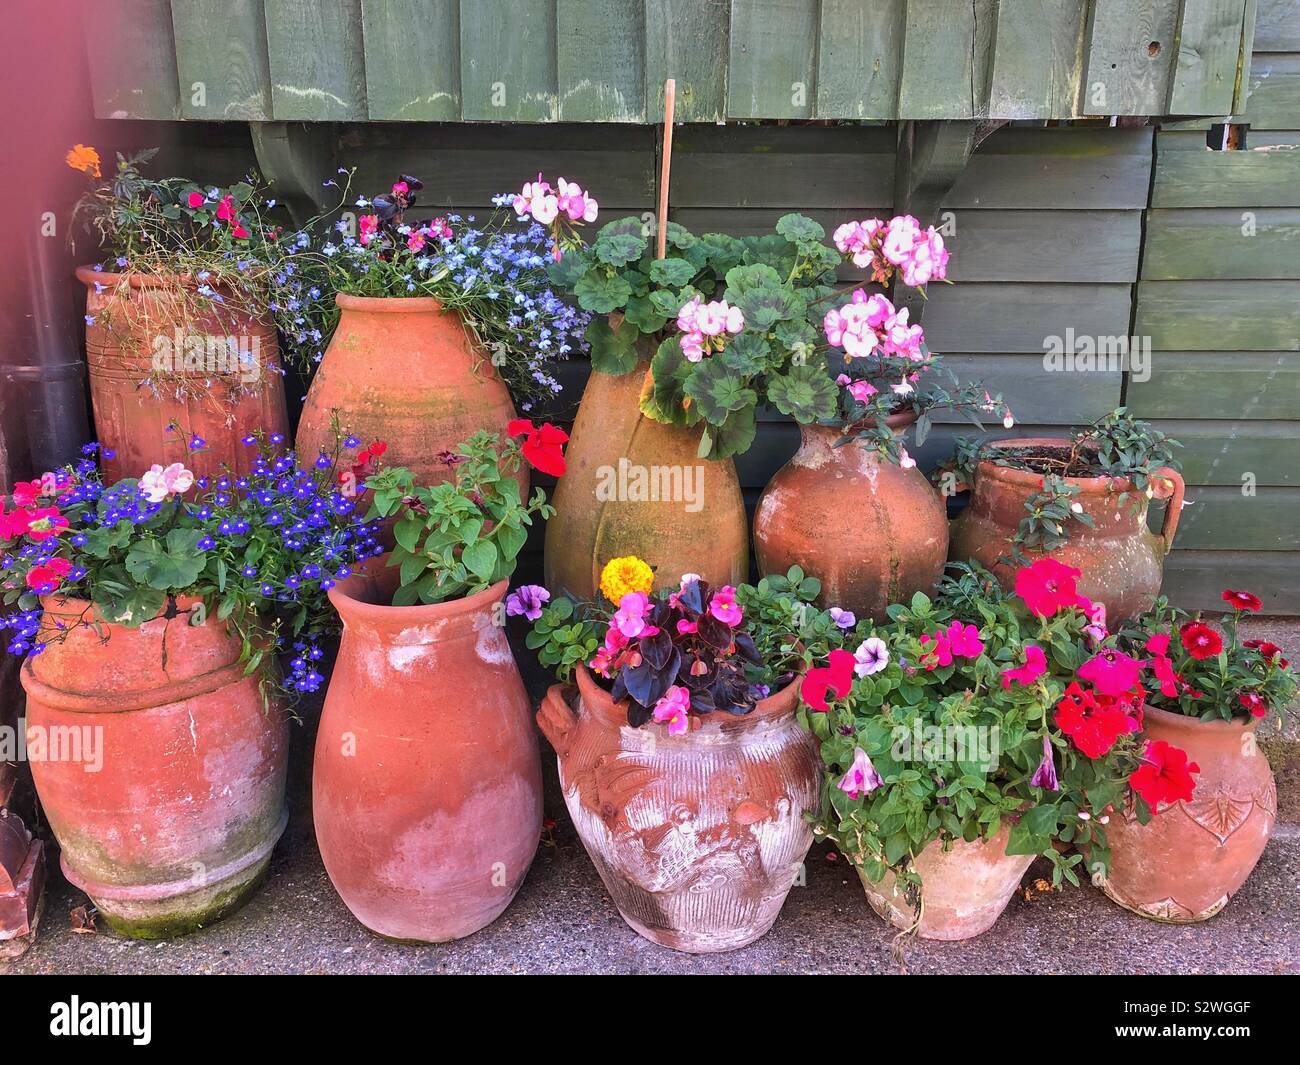 Assorted flower pots with flowers growing in them. Stock Photo